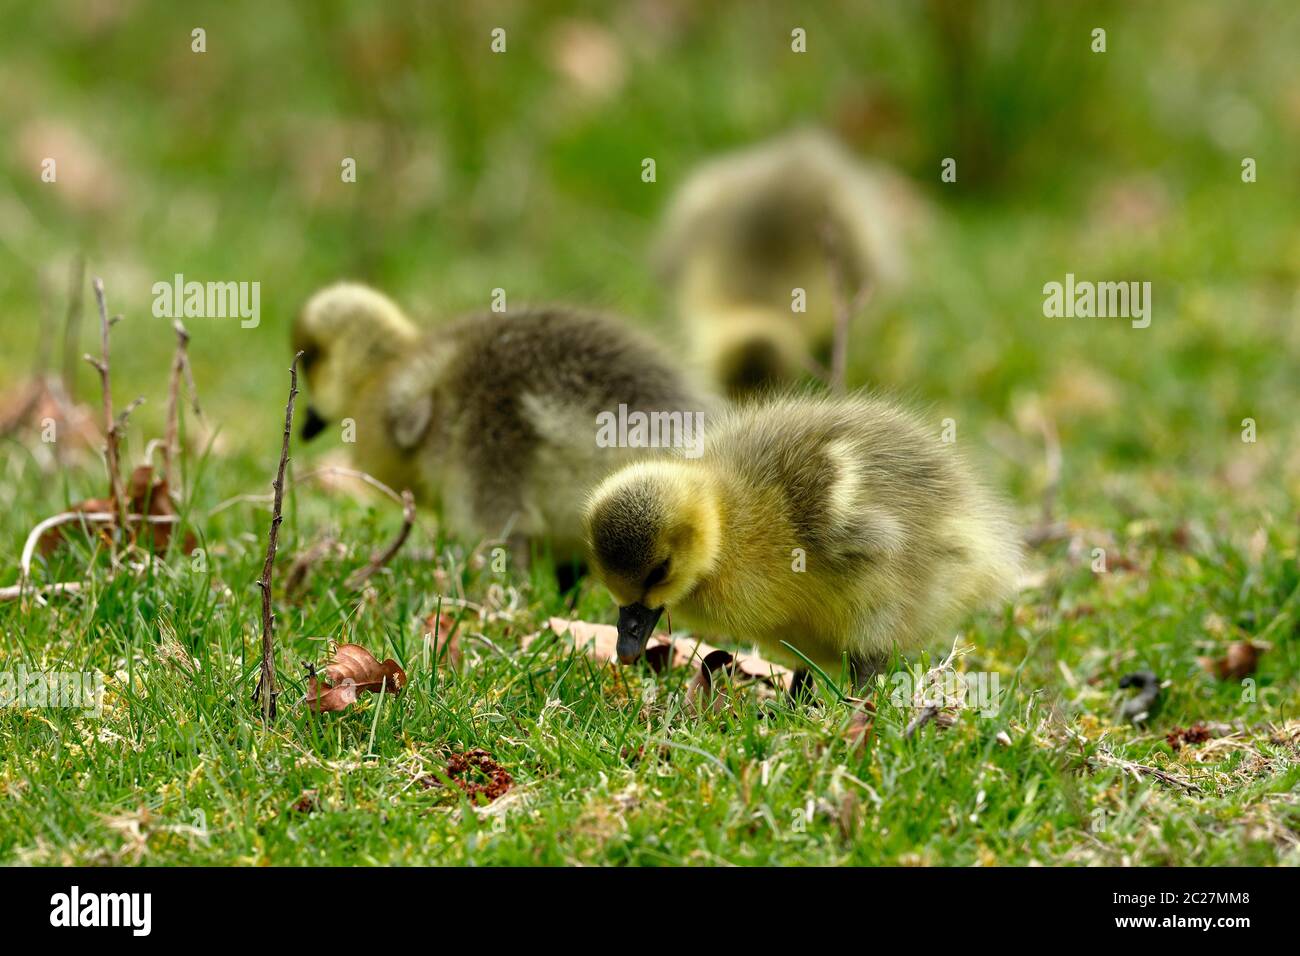 The European Greylag Goose with Chicks Stock Photo